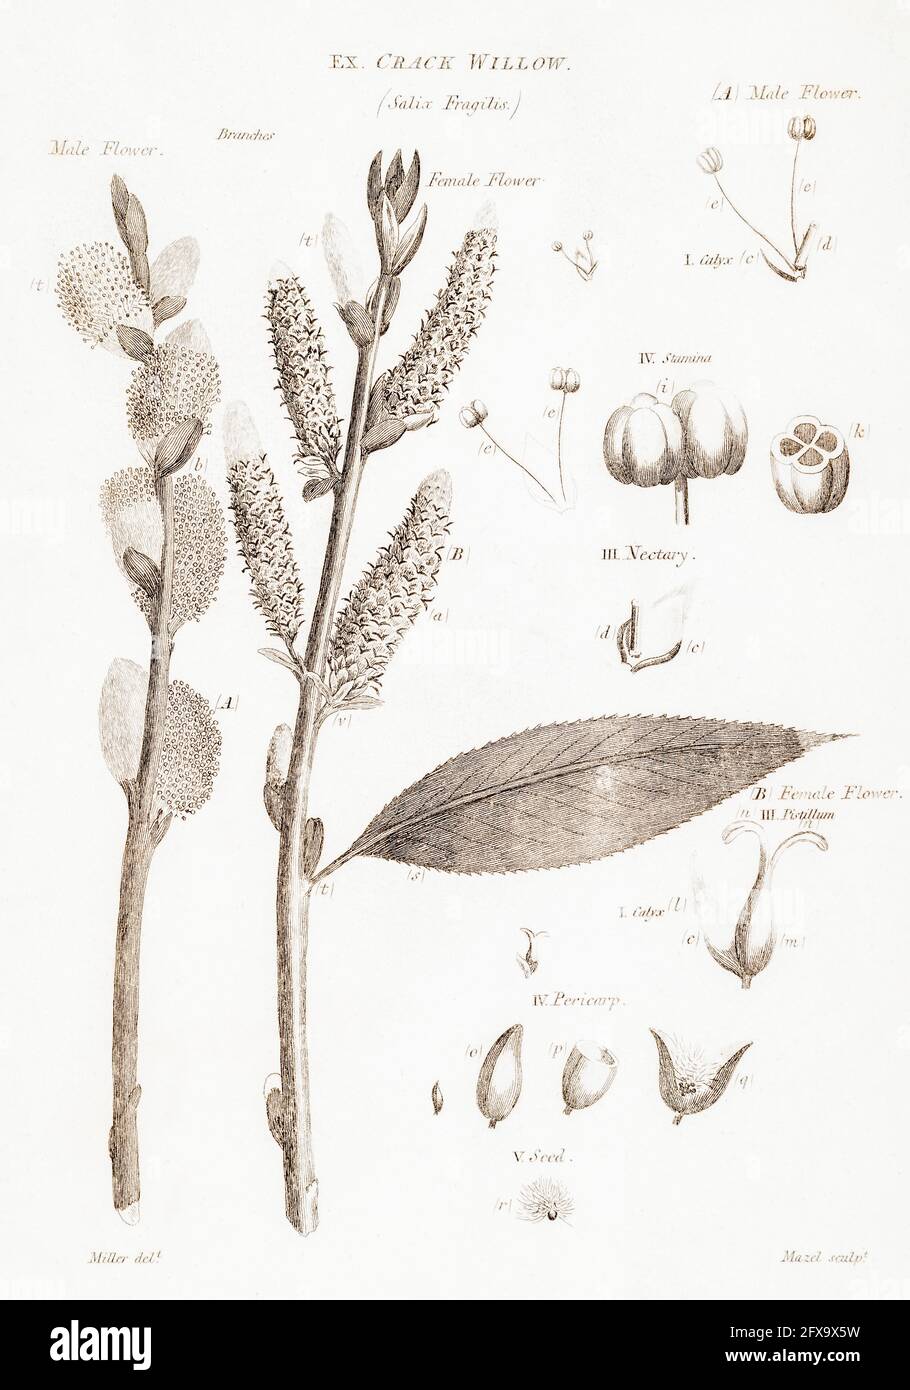 Copperplate botanical illustration of Crack Willow / Salix fragilis from Robert Thornton's British Flora, 1812. Once used as a medicinal plant. Stock Photo